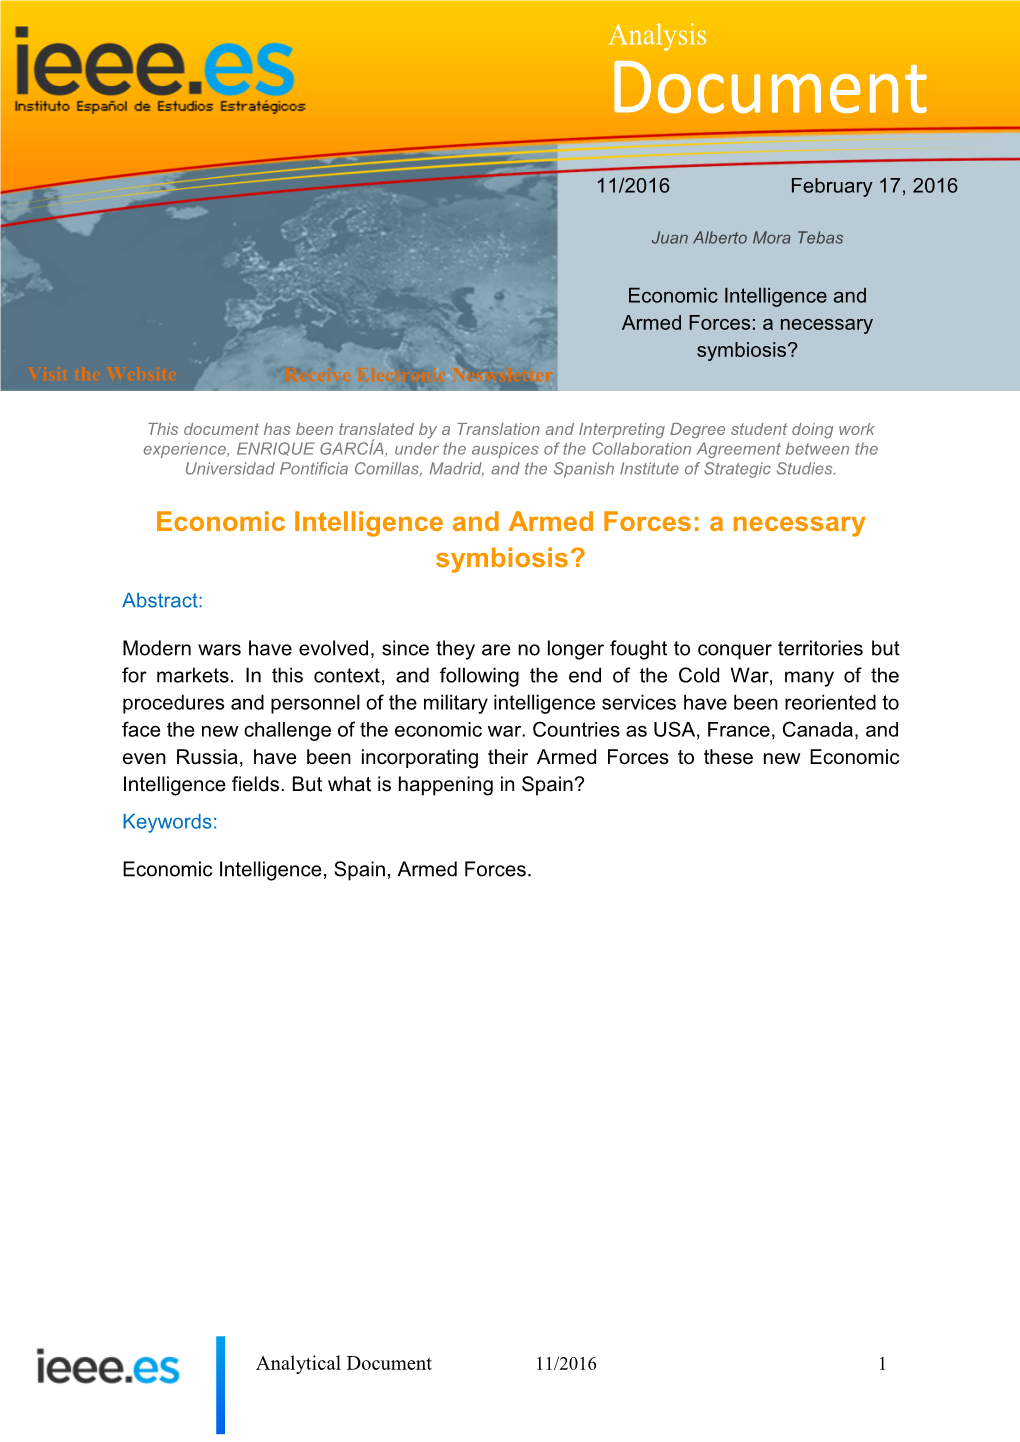 Economic Intelligence and Armed Forces: a Necessary Symbiosis? Visit the Website Receive Electronic Neswsletter